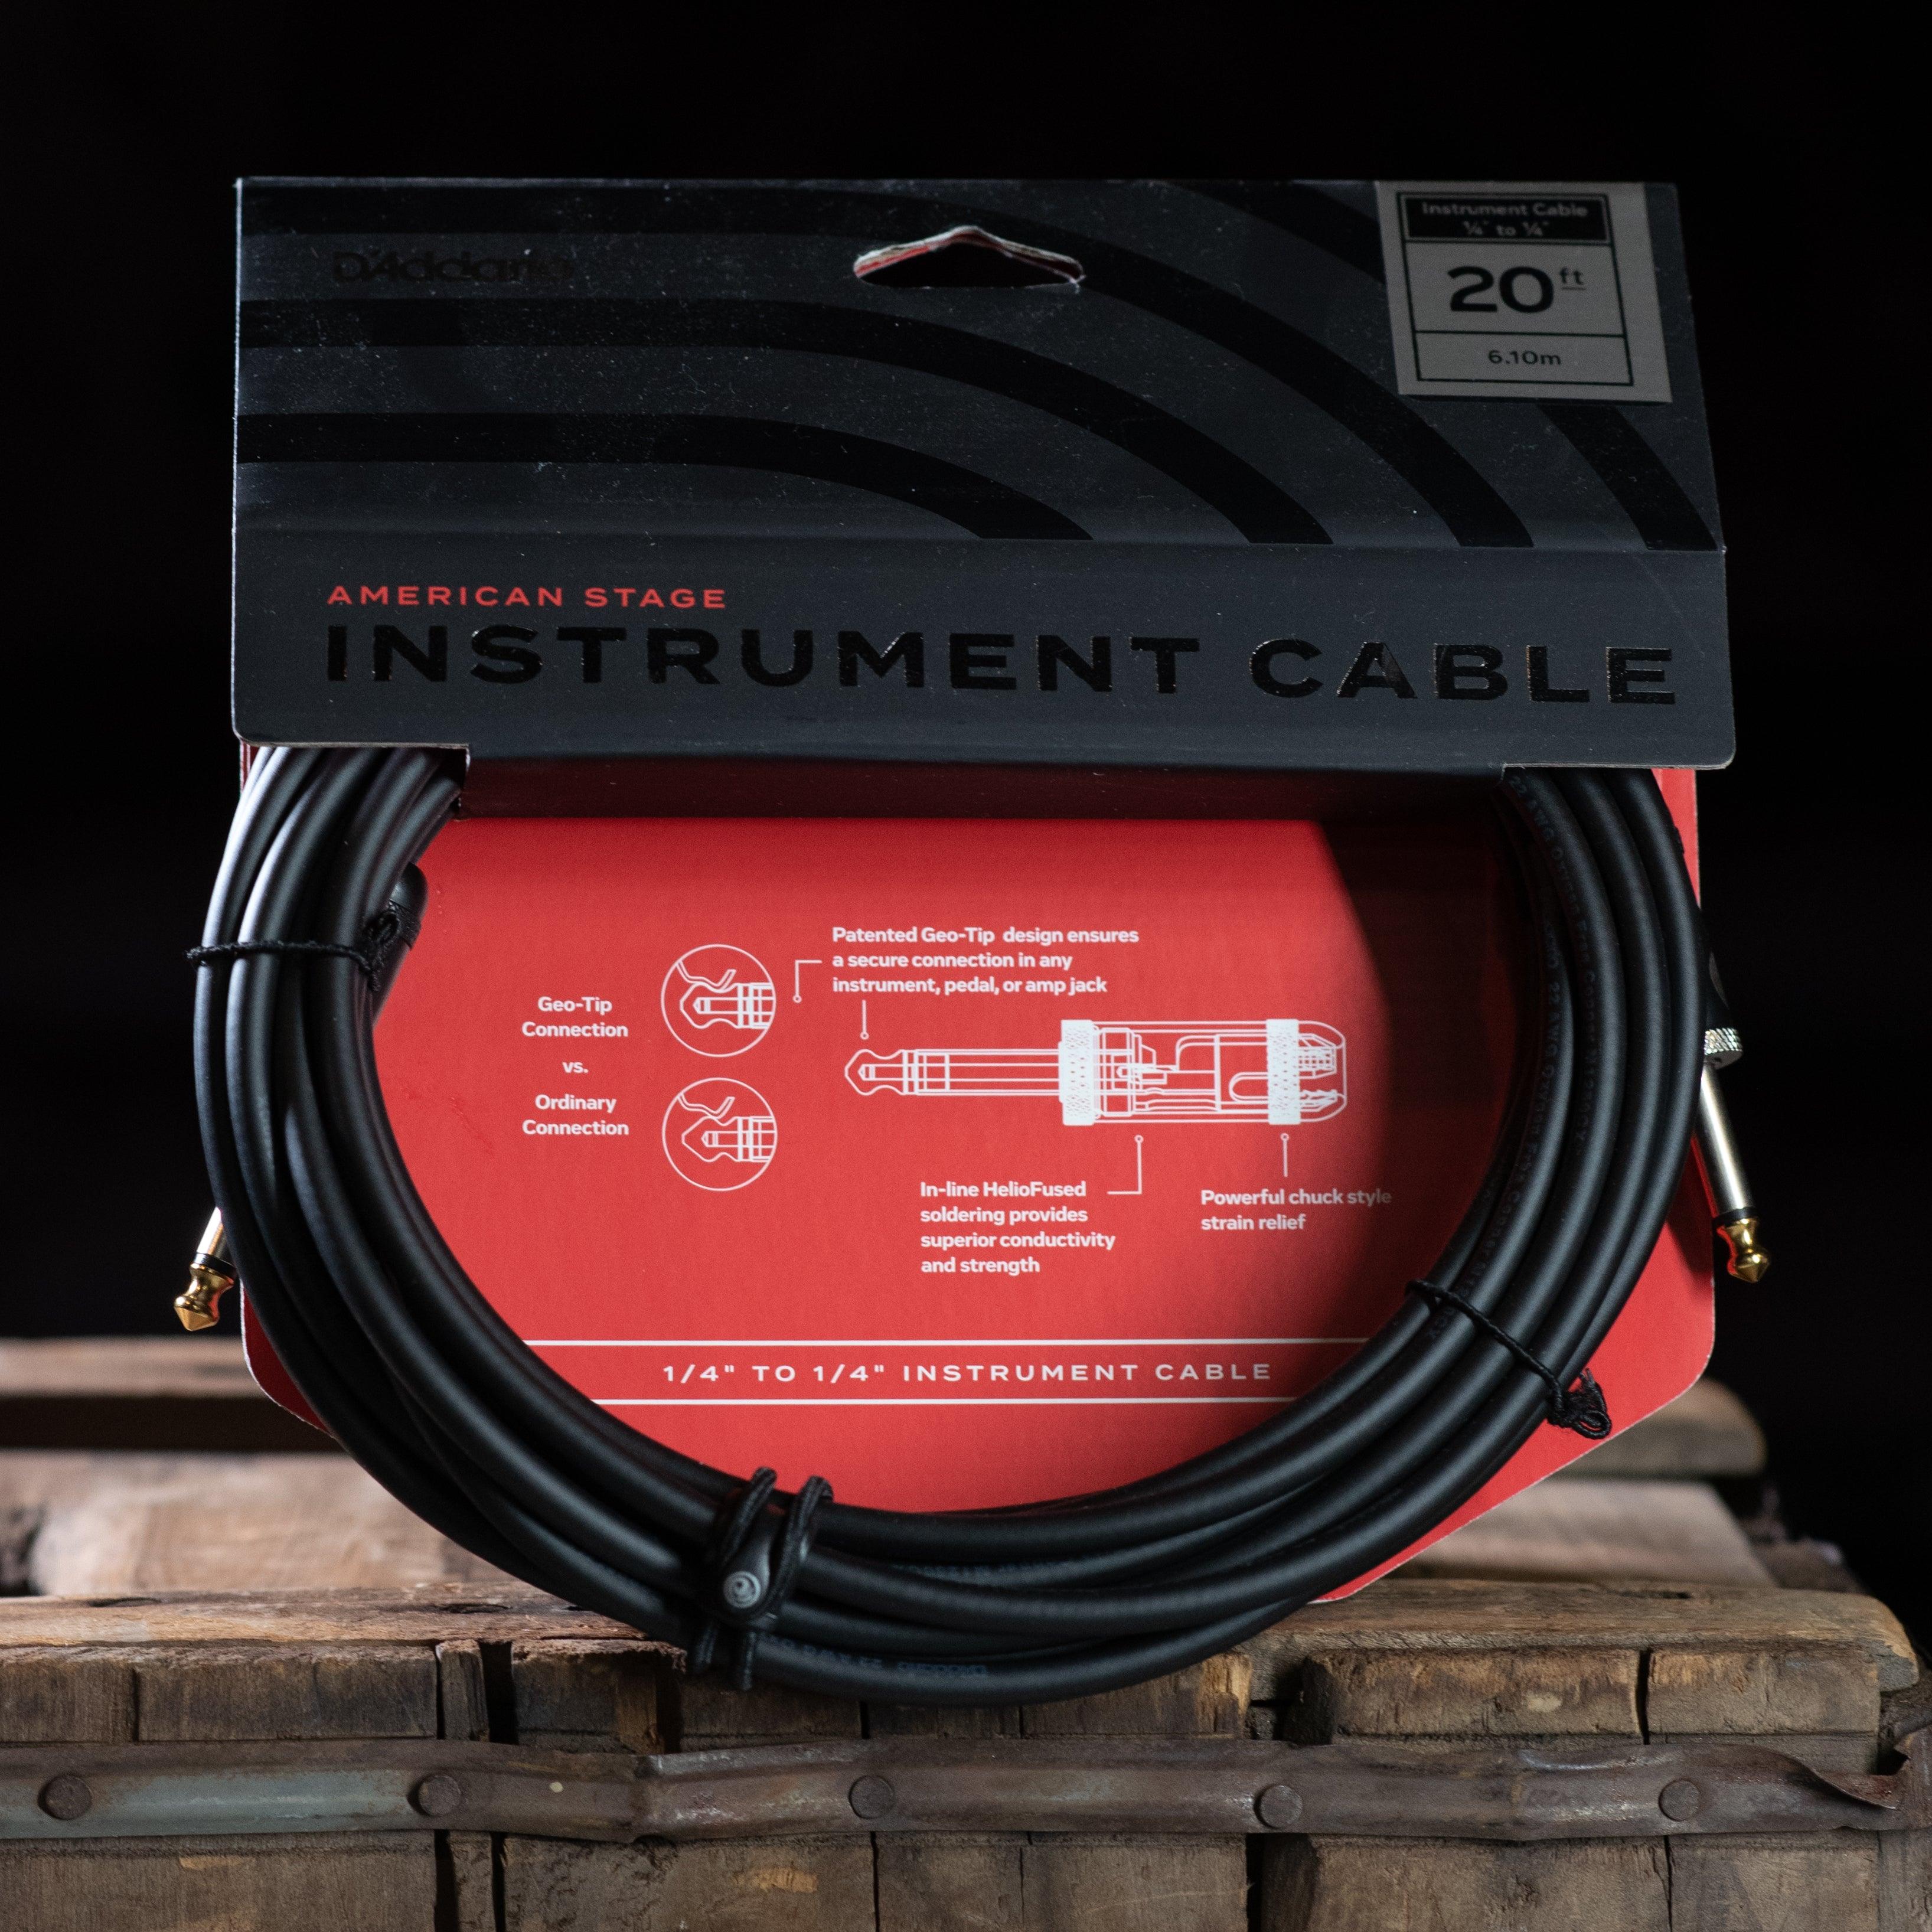 D'addario American Stage Cable 20 ft. - Impulse Music Co.